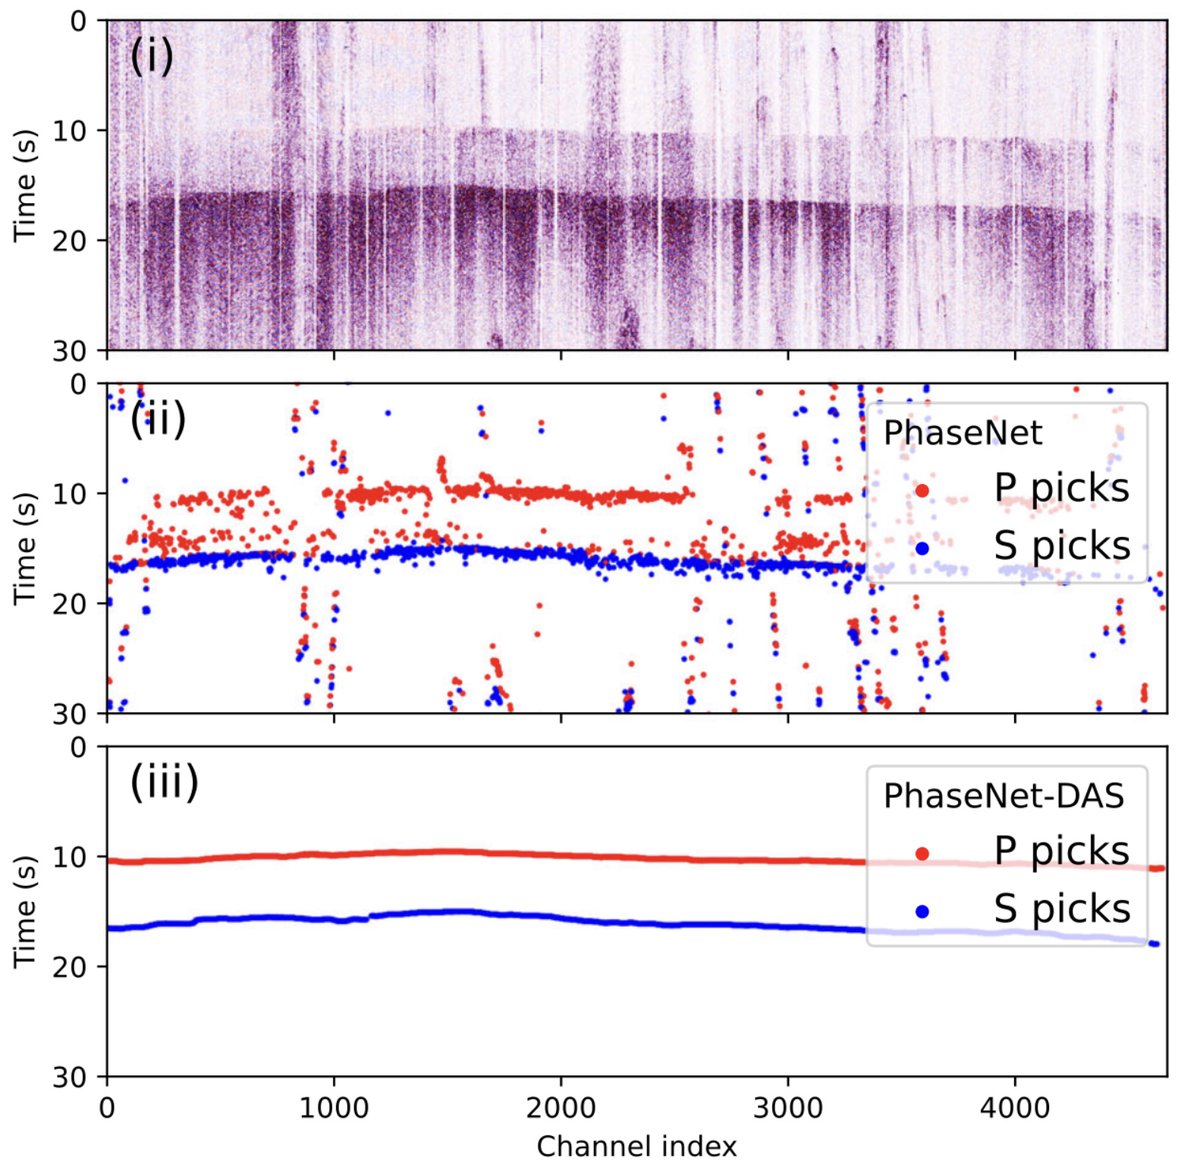 Phase picking in DAS is challenging with noisy data and thousands of channels involved. Our new paper in @NatureComms demonstrates how #MachineLearning effectively handles this. Explore PhaseNet-DAS! @zhuwq0 @jxli42 @jiuxun_yin @zross_ nature.com/articles/s4146…